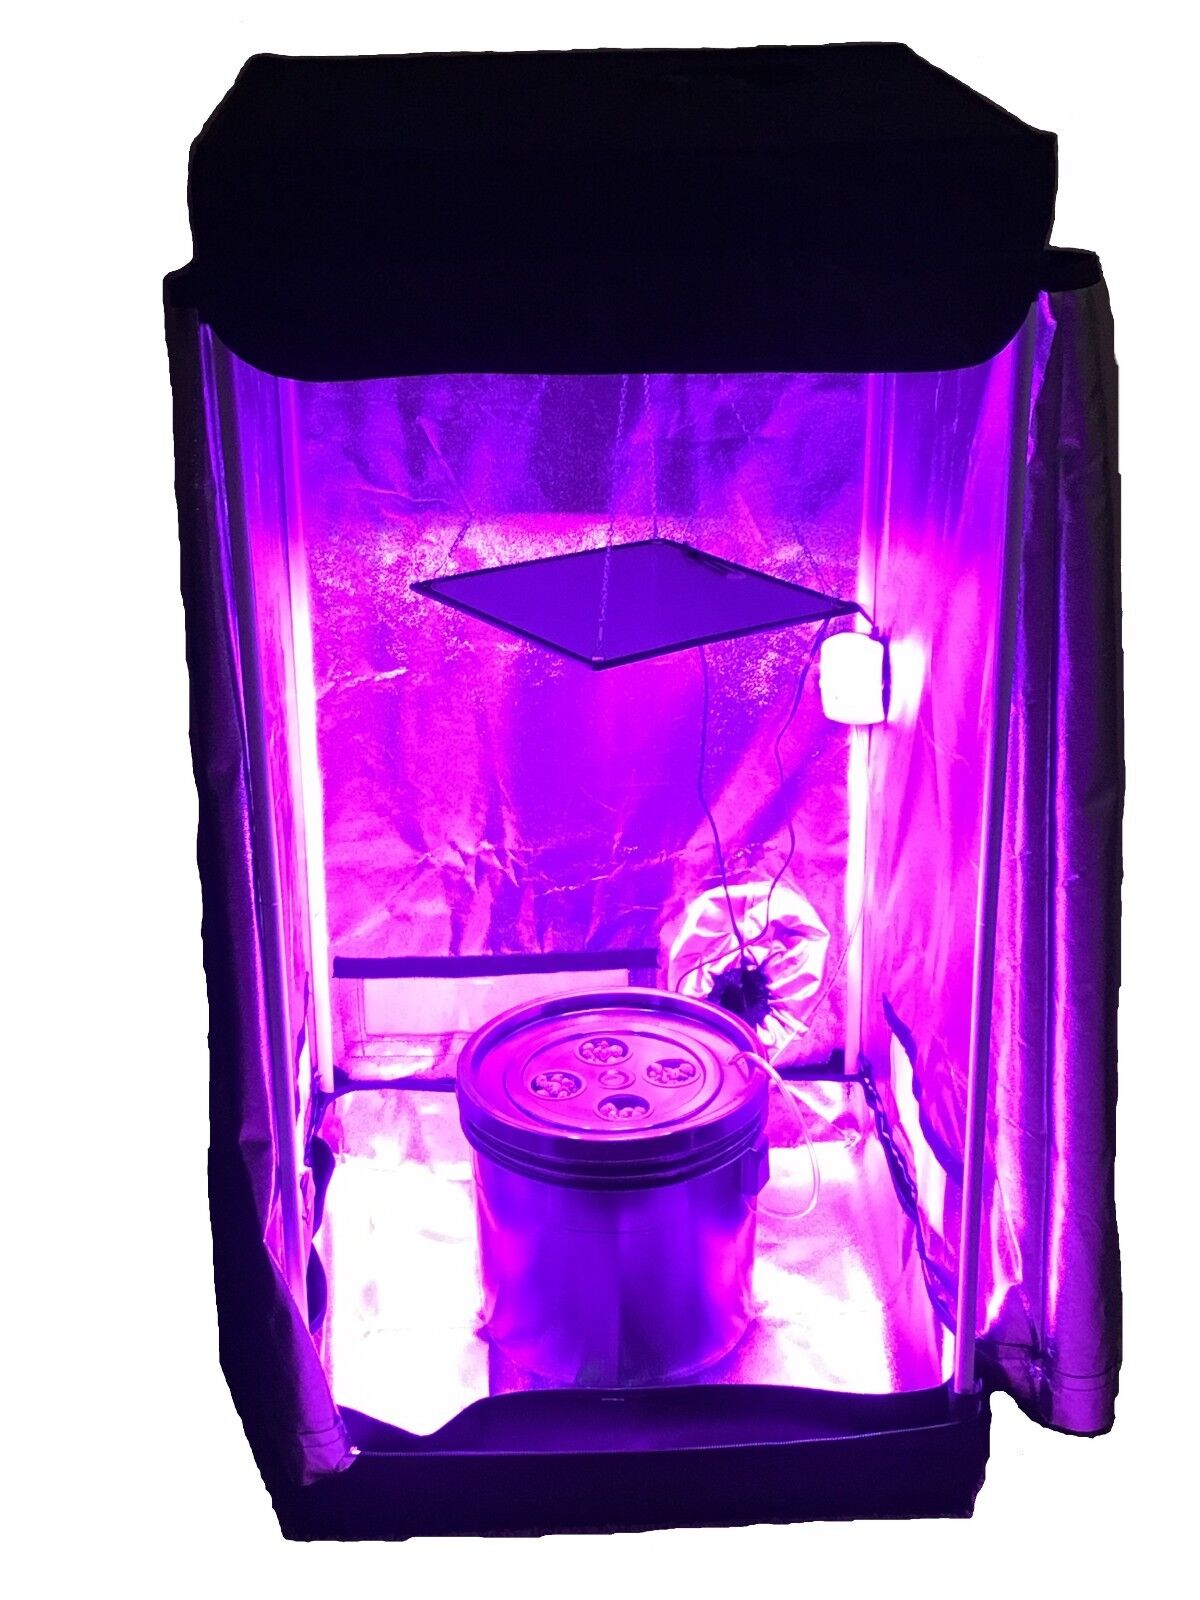 4 Site Hydroponic System Grow Room - Complete Grow Tent Kit DWC - LED Grow Light